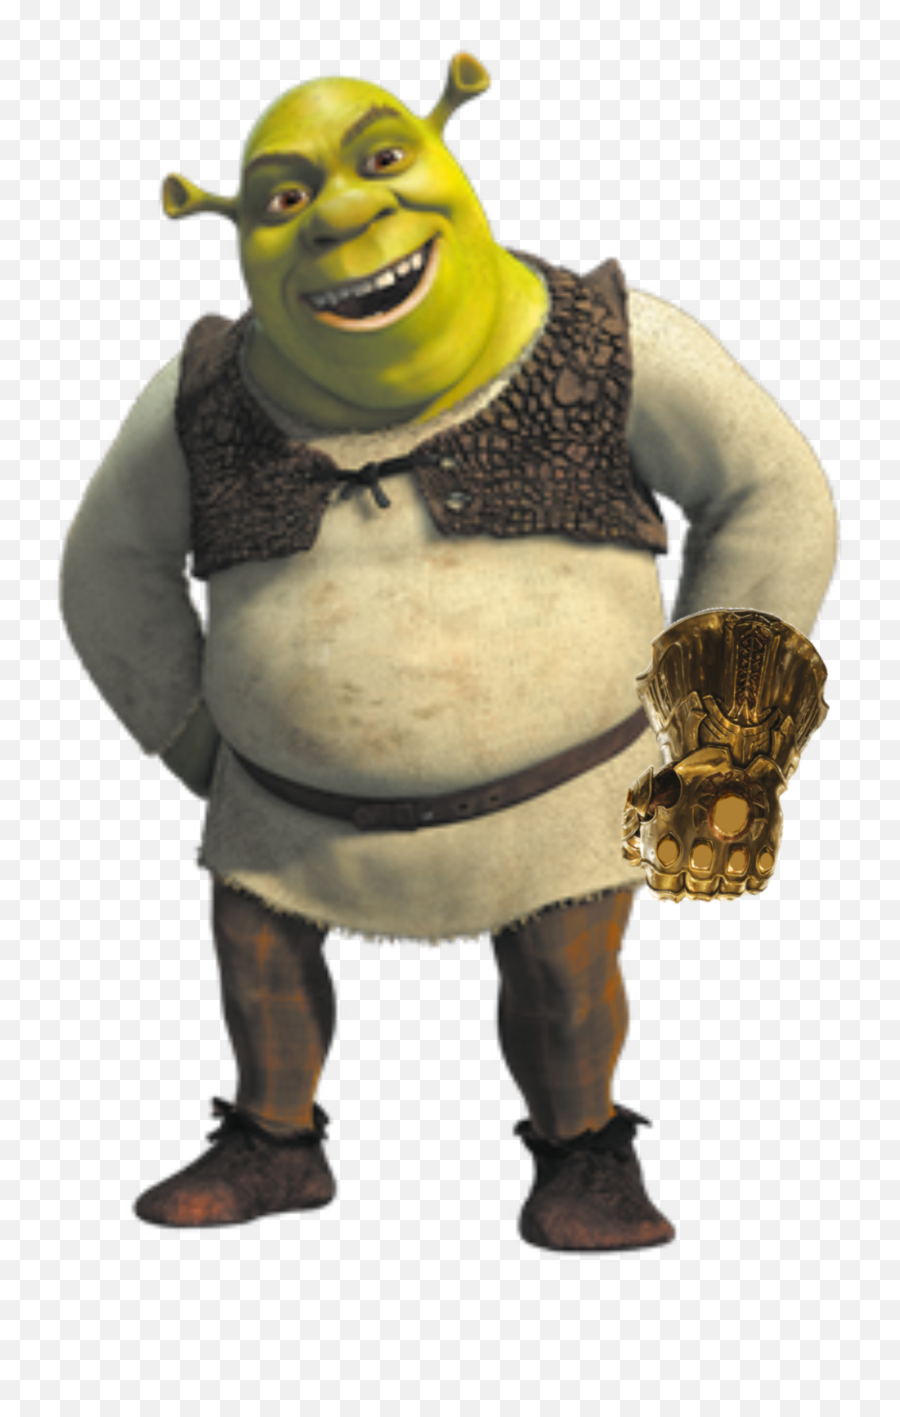 On A Mission To Get All The Image - Shrek Standing Emoji,Infinity Gauntlet Stones Emojis